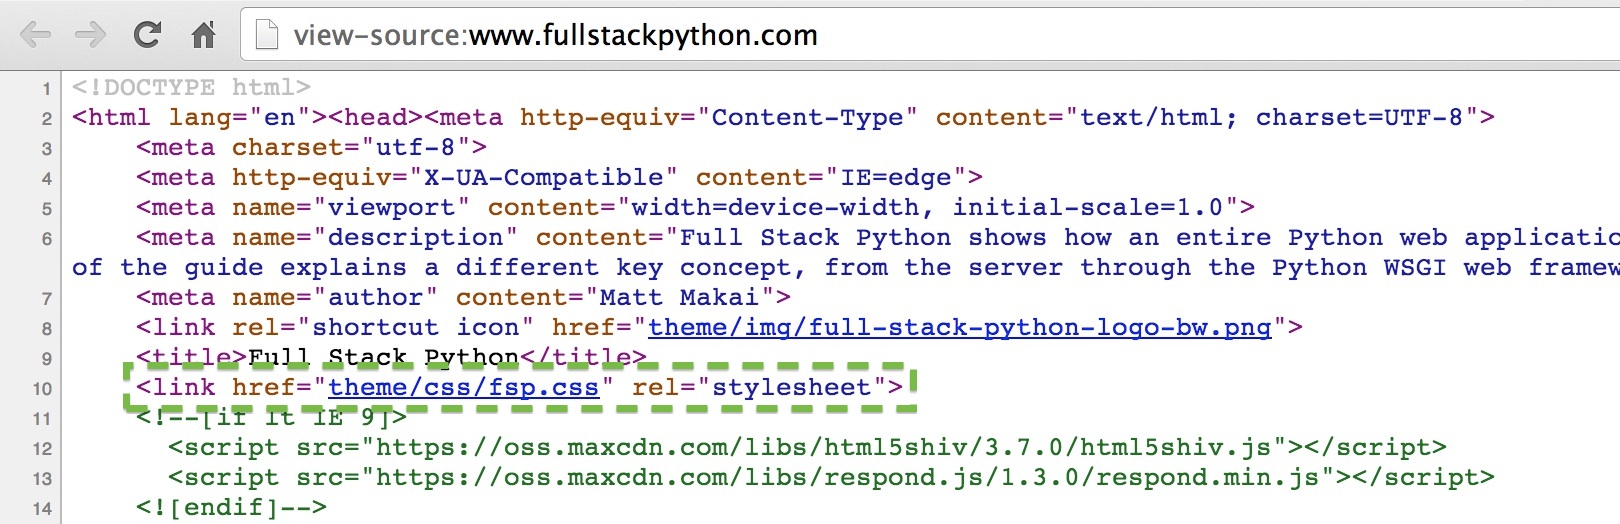 View source screenshot for the fsp.css file in index.html.